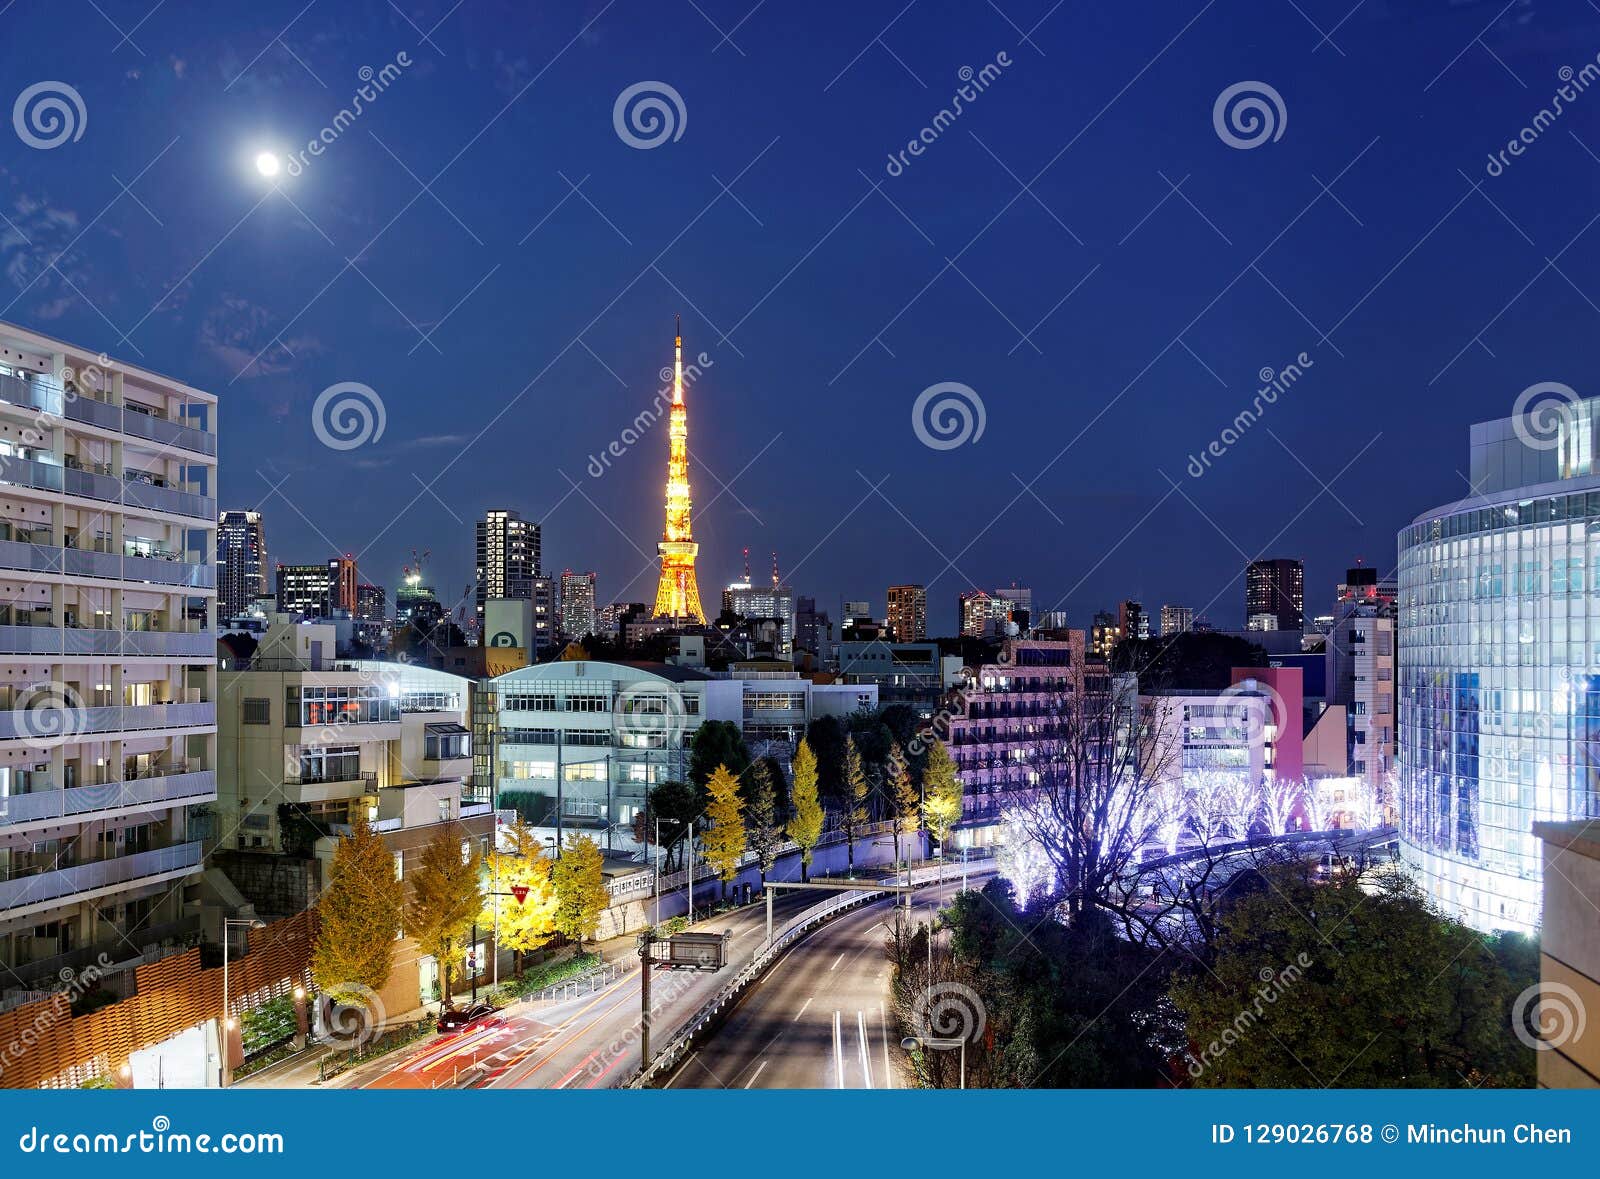 Night Scenery Of Romantic Winter Illumination Display At Christmas In Roppongi Hills Stock Photo Image Of Color Building